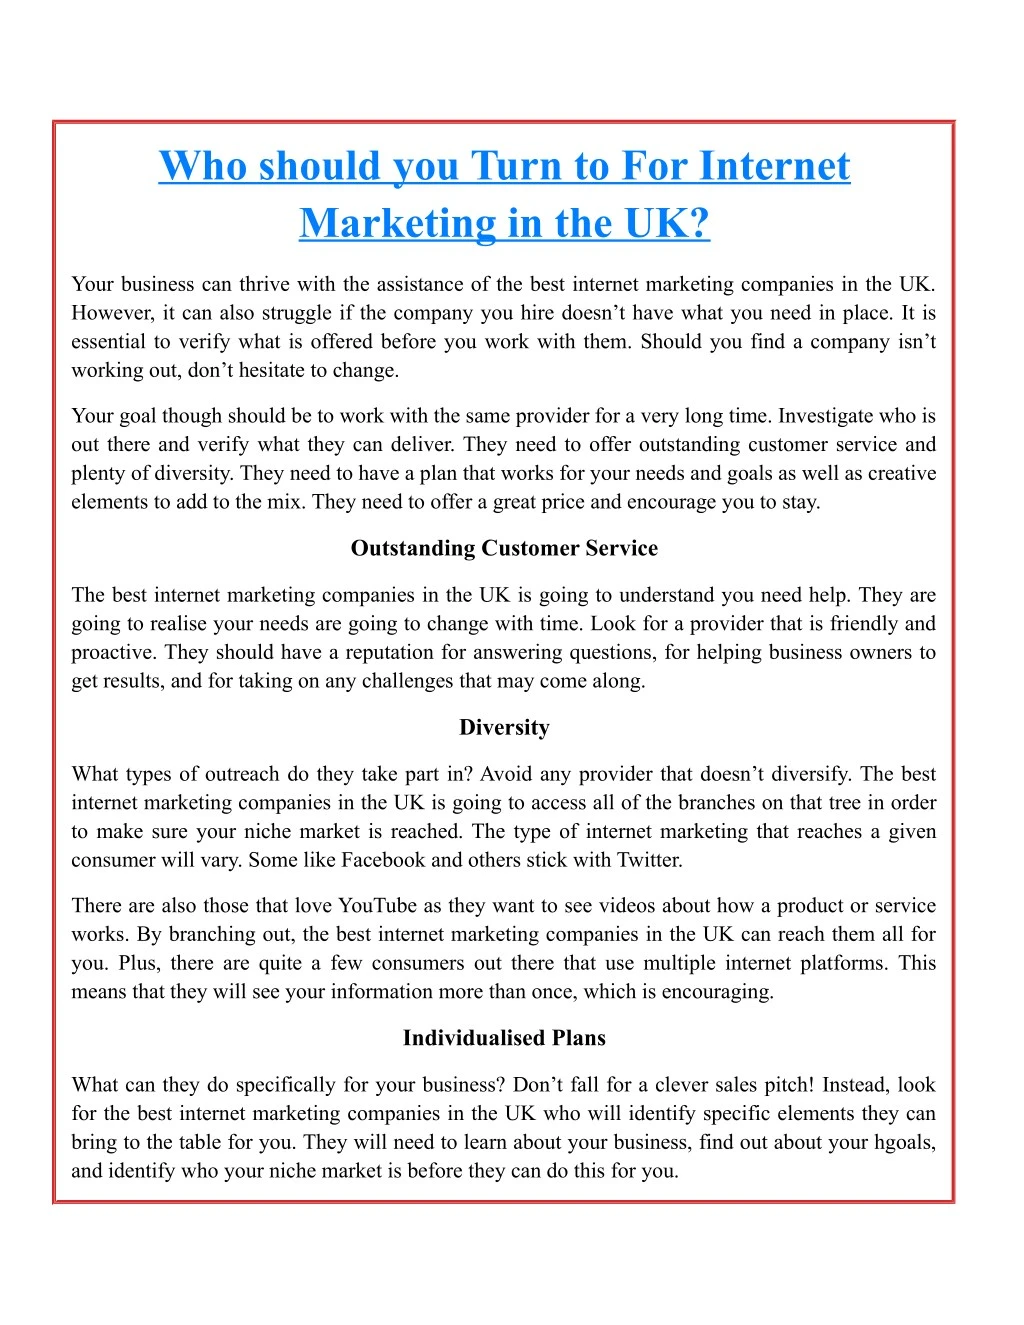 who should you turn to for internet marketing